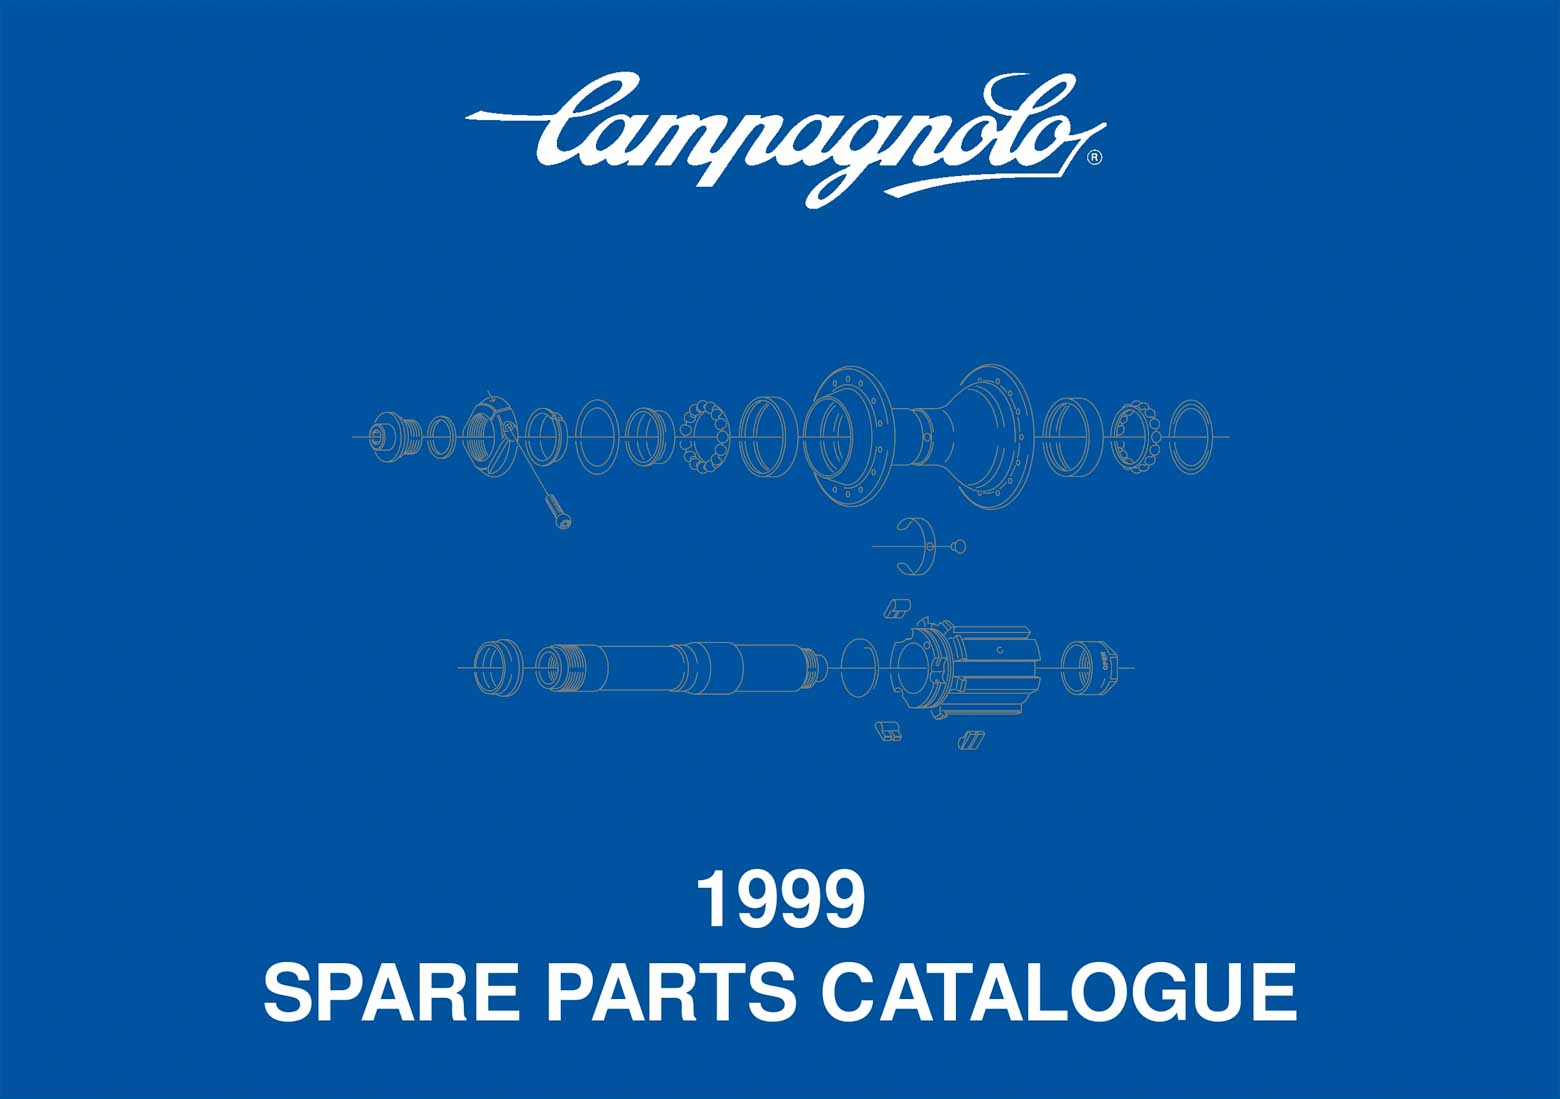 Campagnolo  - 1999 Spare Parts Catalogue front cover main image